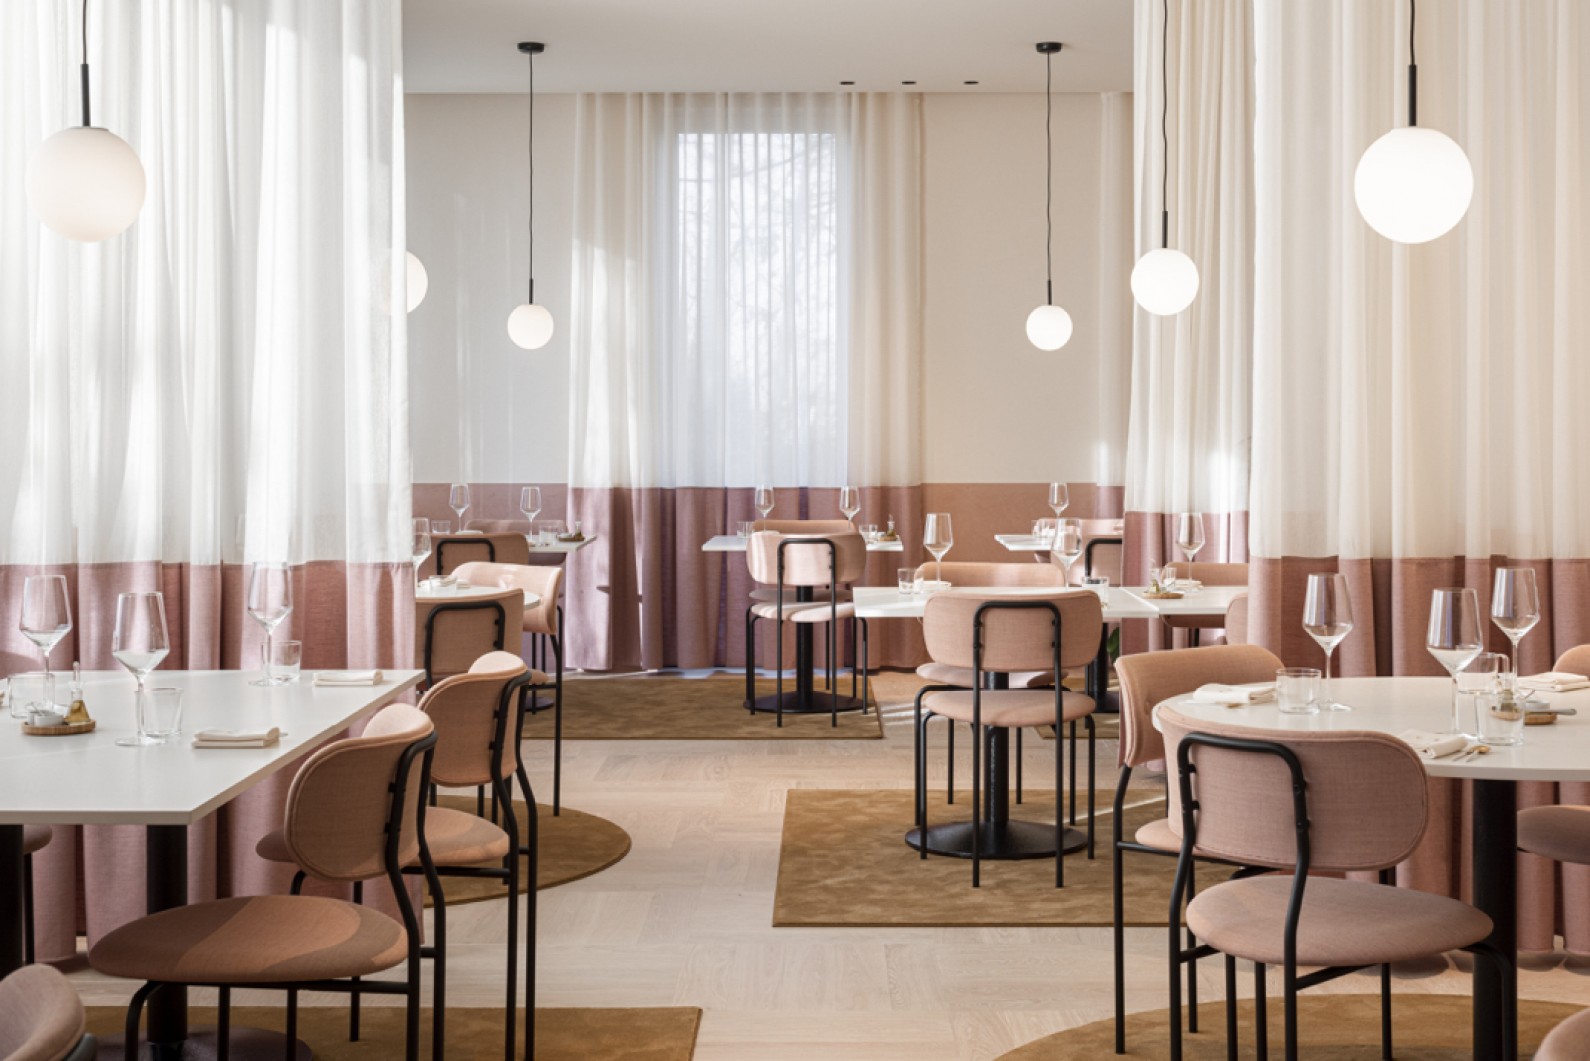 The name CRKL refers to the circular forms in the interior of this restaurant 